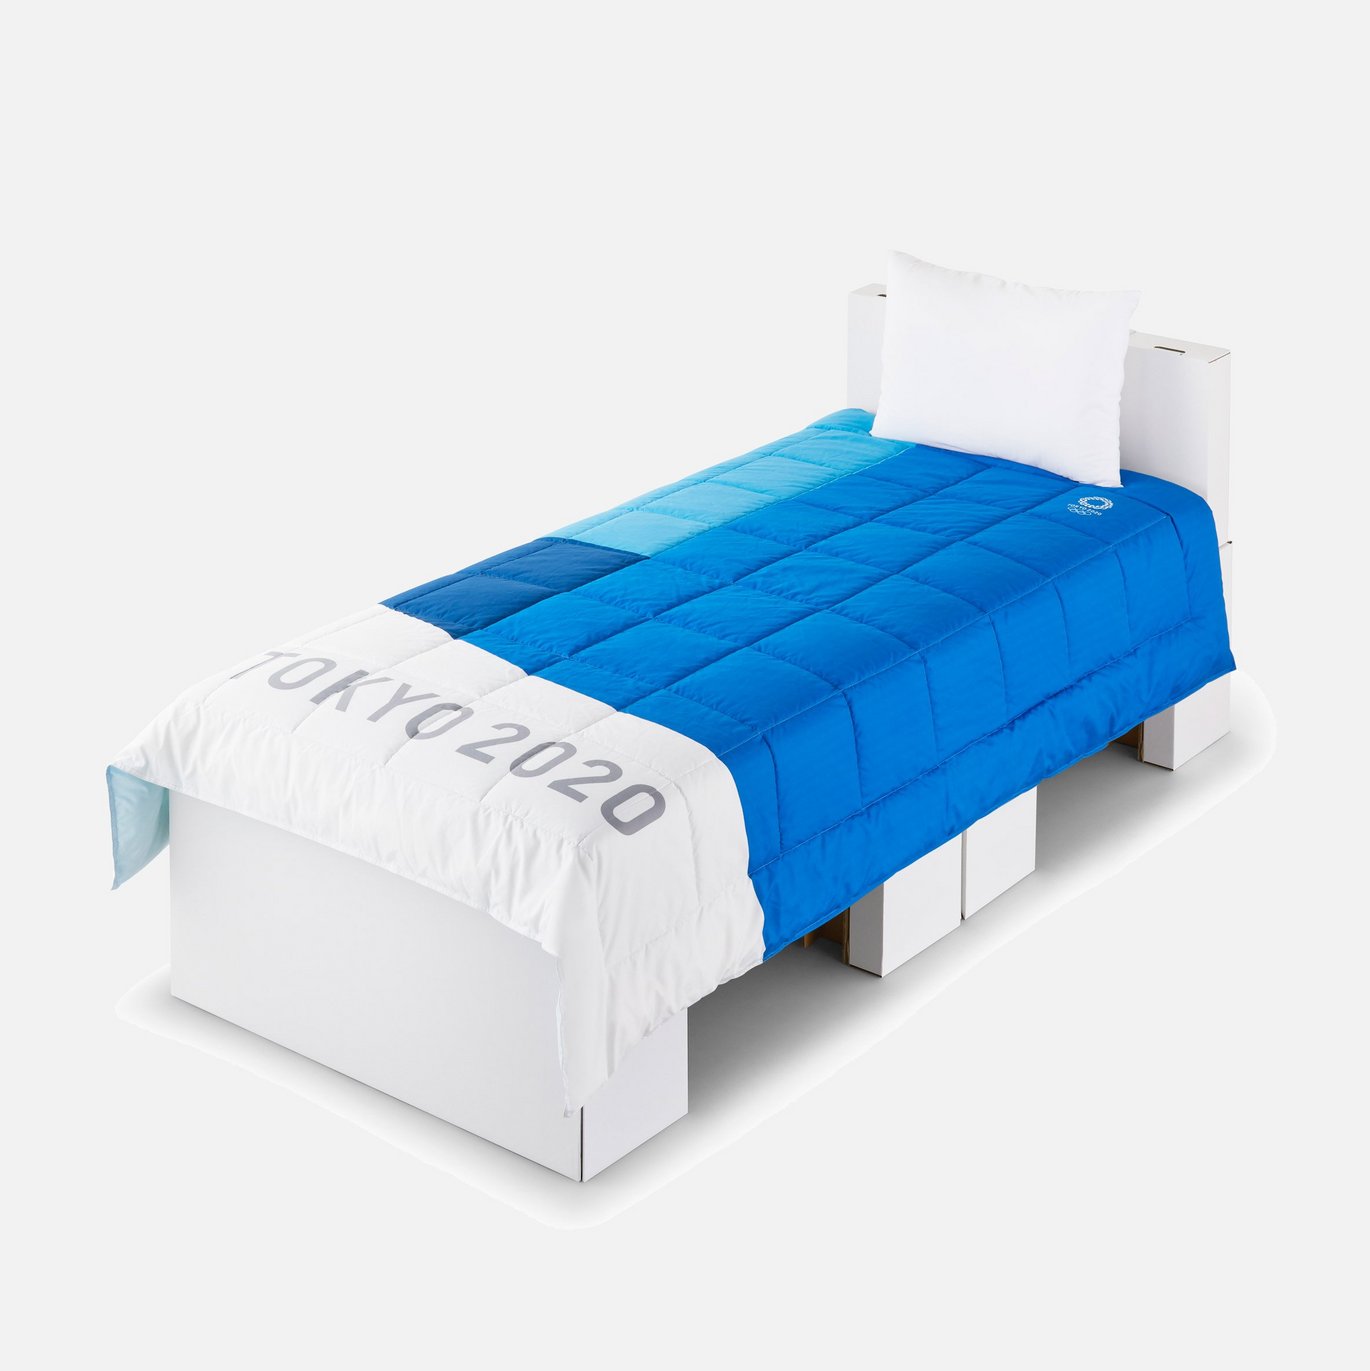 Bed with cardboard bed frame, designed by Airweave